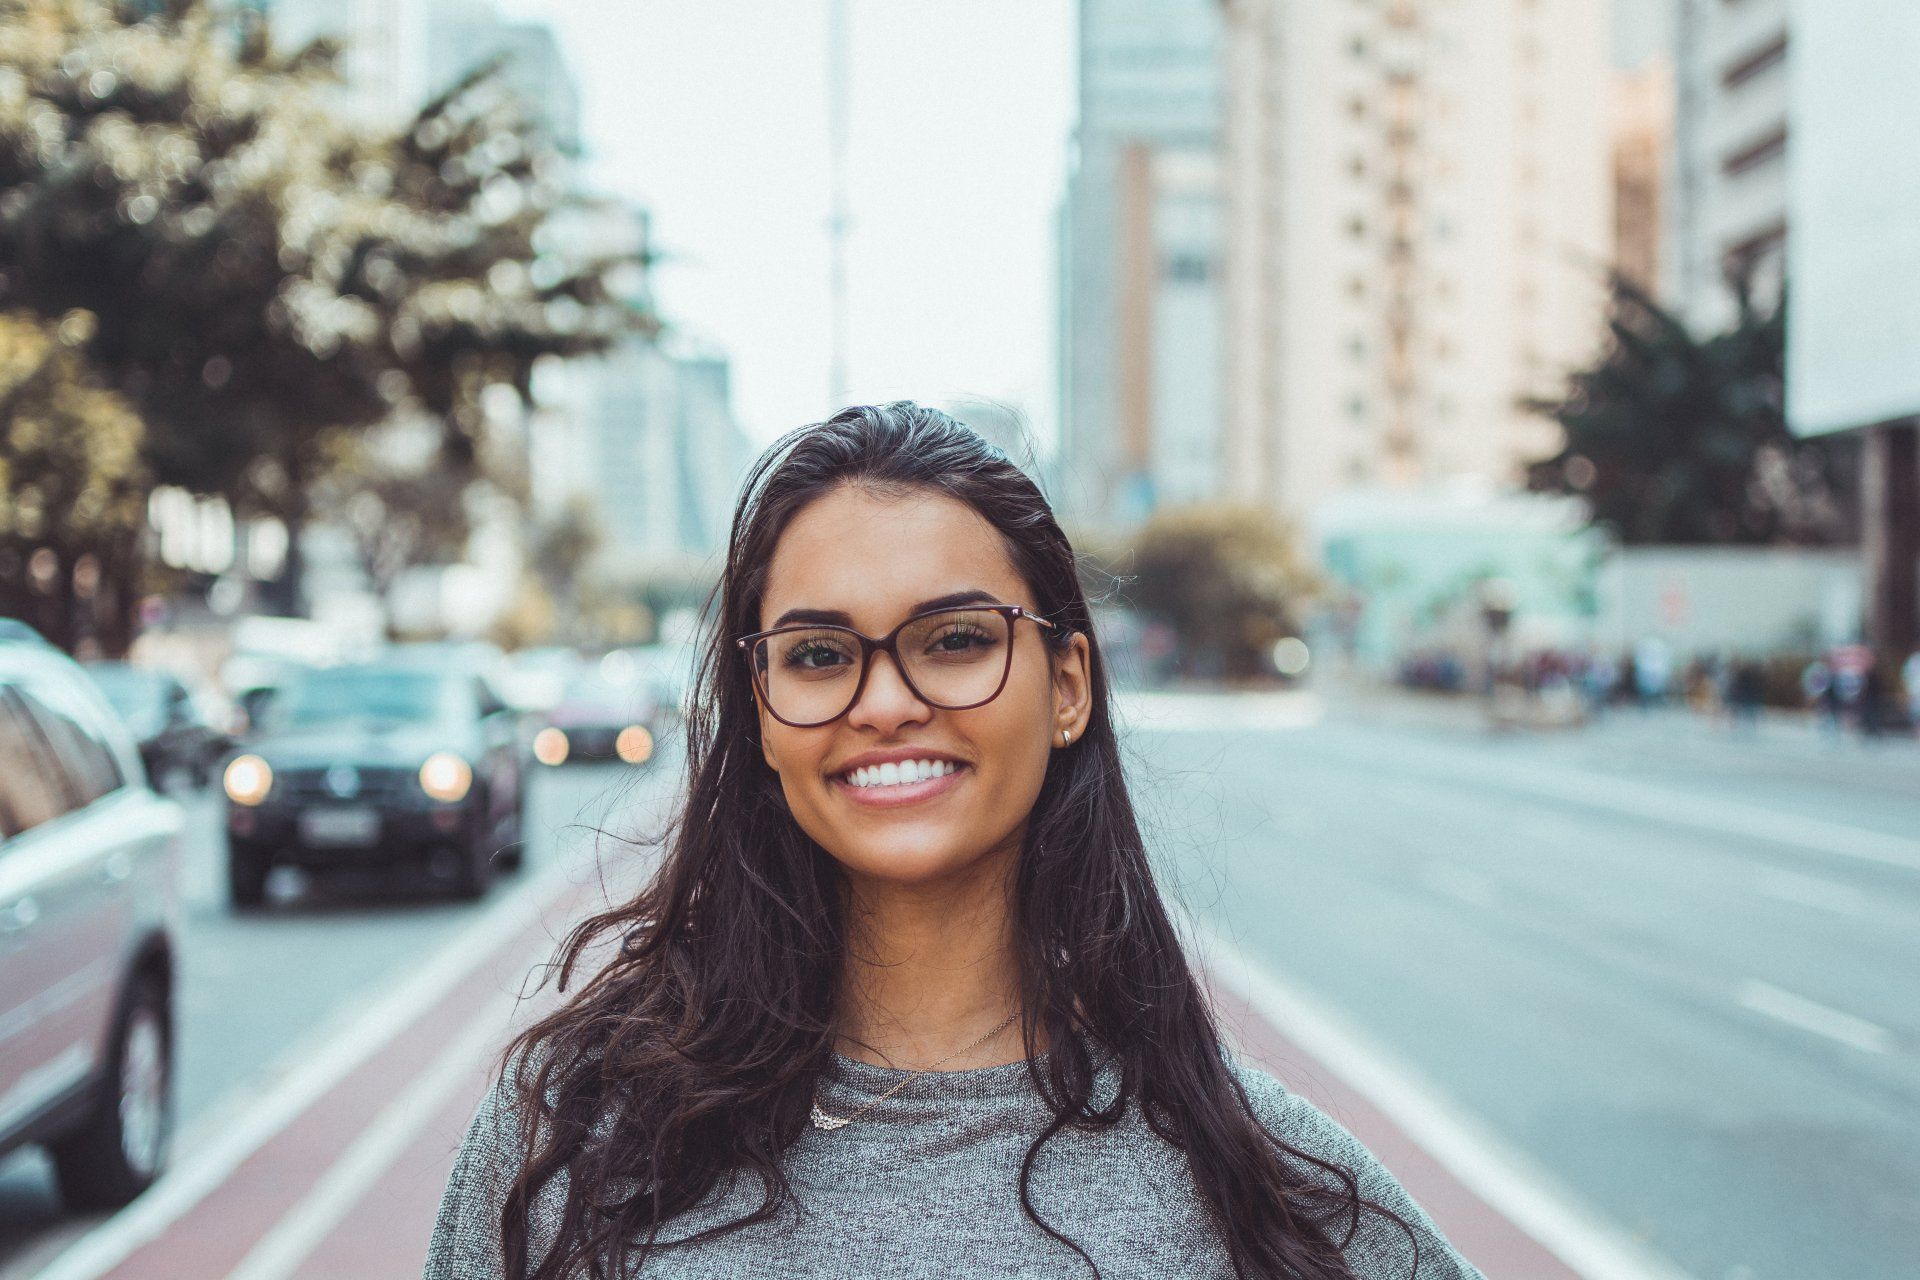 Young woman with long hair and glasses smiling.